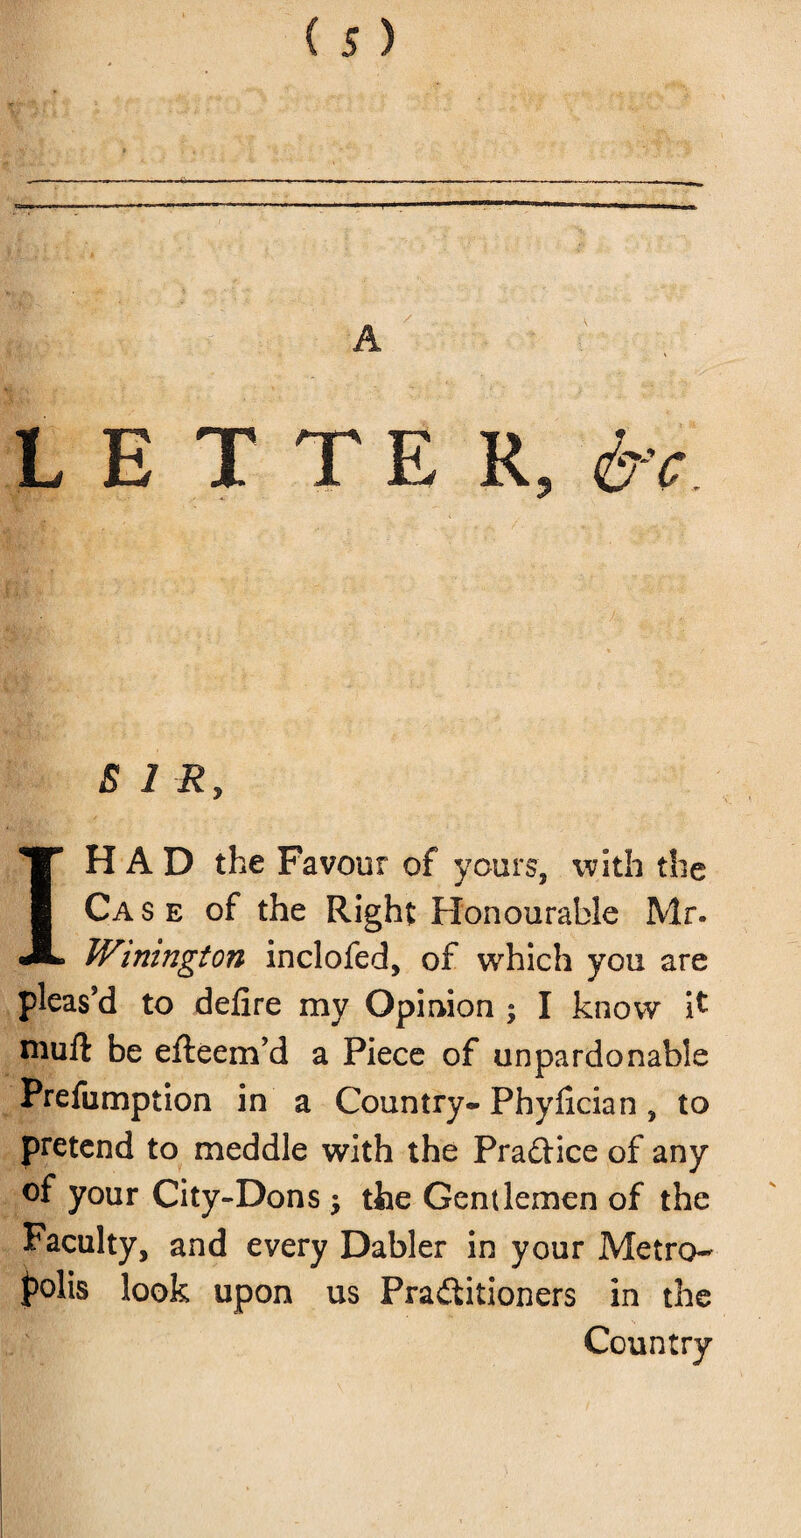 LETTER,^ B 1 Ry IH A D the Favour of yours, with the Case of the Right Honourable Mr. Winington inclofed, of which you are pleas'd to delire my Opinion ; I know it niuft be efteem’d a Piece of unpardonable Preemption in a Country- Phylician, to pretend to meddle with the Practice of any of your City-Dons the Gentlemen of the Faculty, and every Dabler in your Metro¬ polis look upon us Pra&itioners in the Country